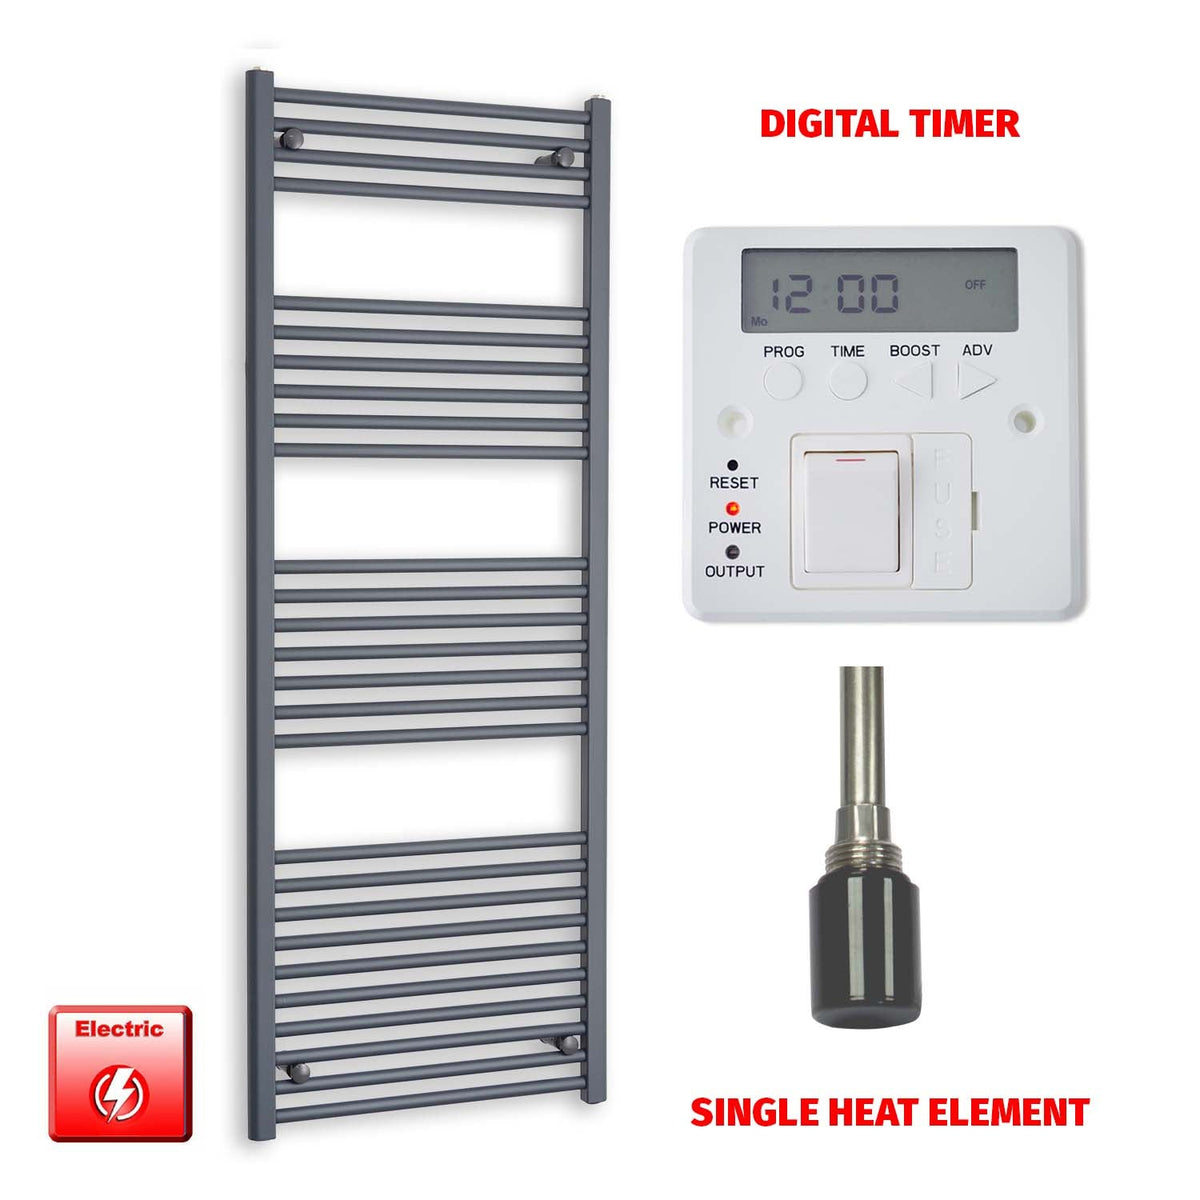 1600mm High 600mm Wide Flat Anthracite Pre-Filled Electric Heated Towel Rail Radiator HTR Single heat element Digital timer